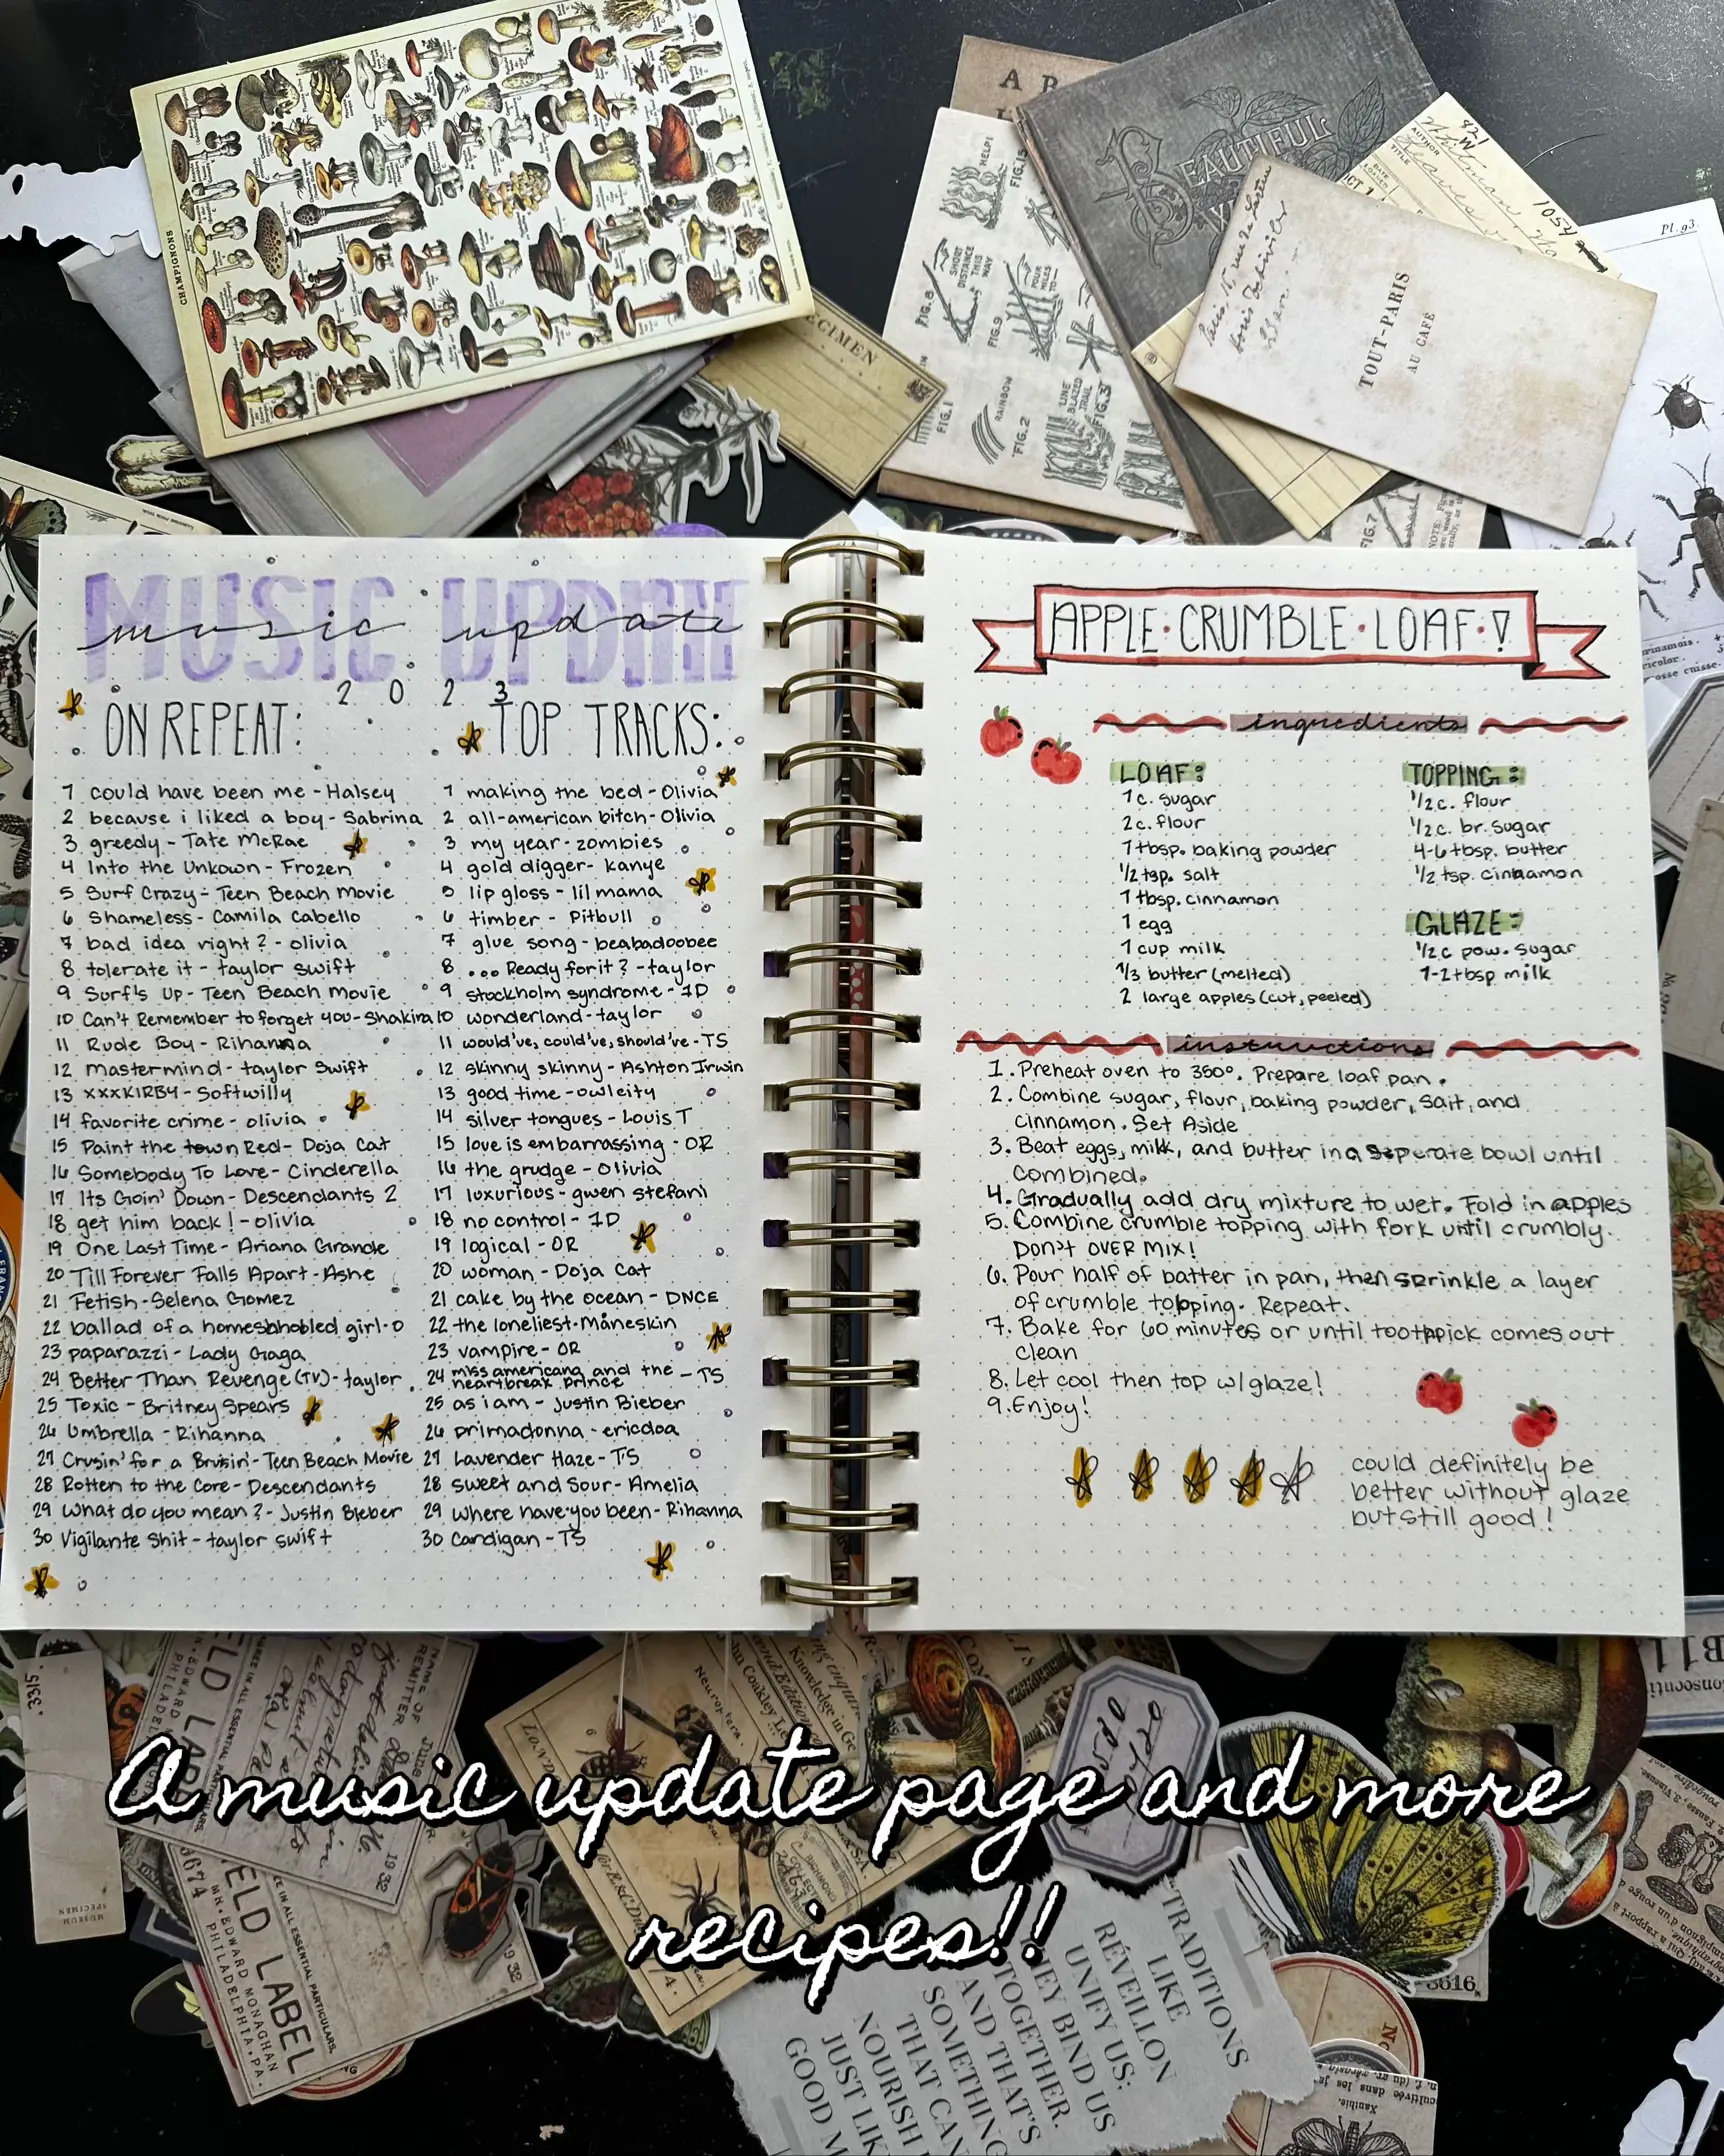 Junk Journaling 101 - How to Add Tip-Ins to Your Journal - Mad